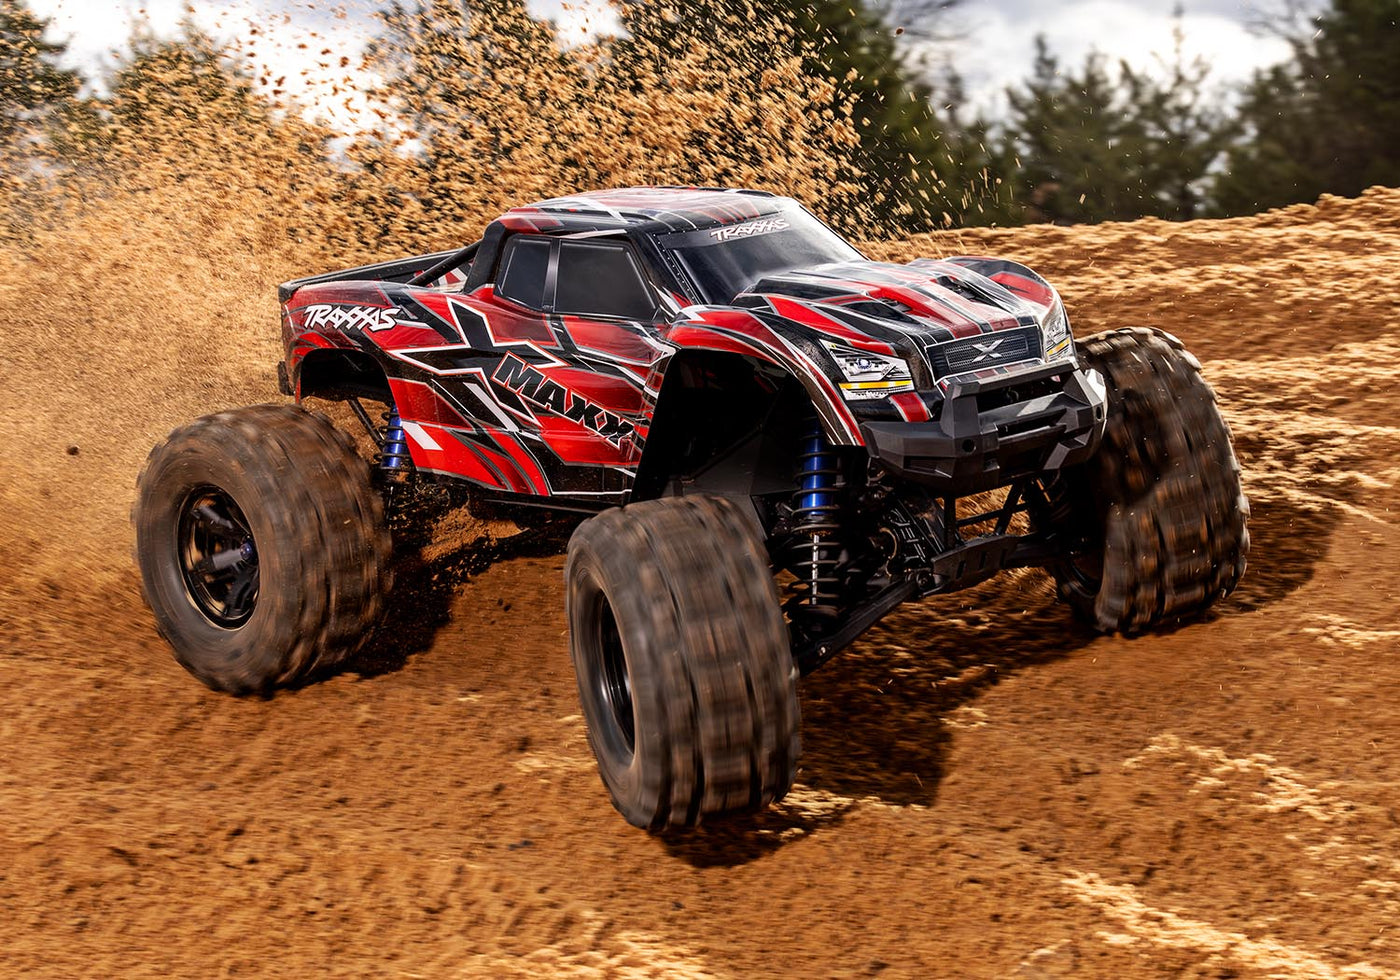 X-Maxx®: 8s Belted Brushless Electric Monster Truck Traxxas 77096-4